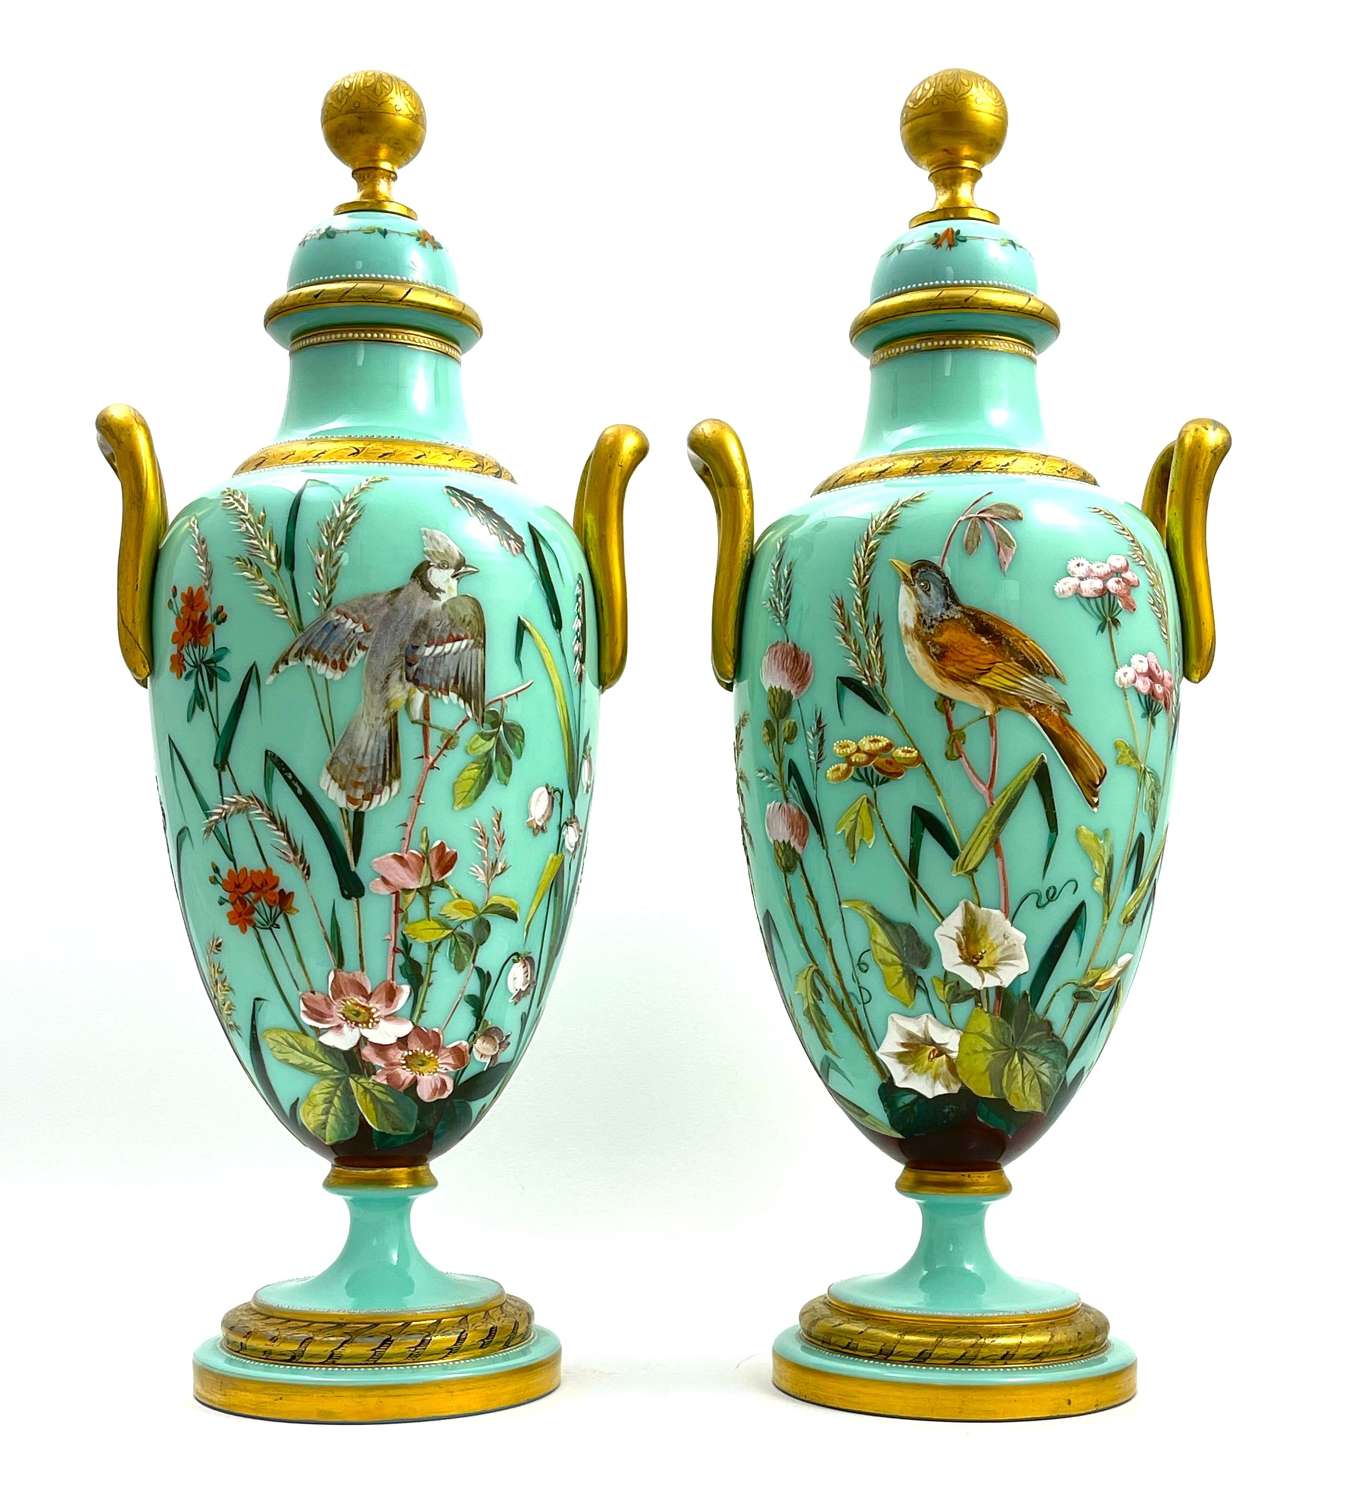 Pair of Exceptional MOSER Opaline Vases with Double Handles and Lids